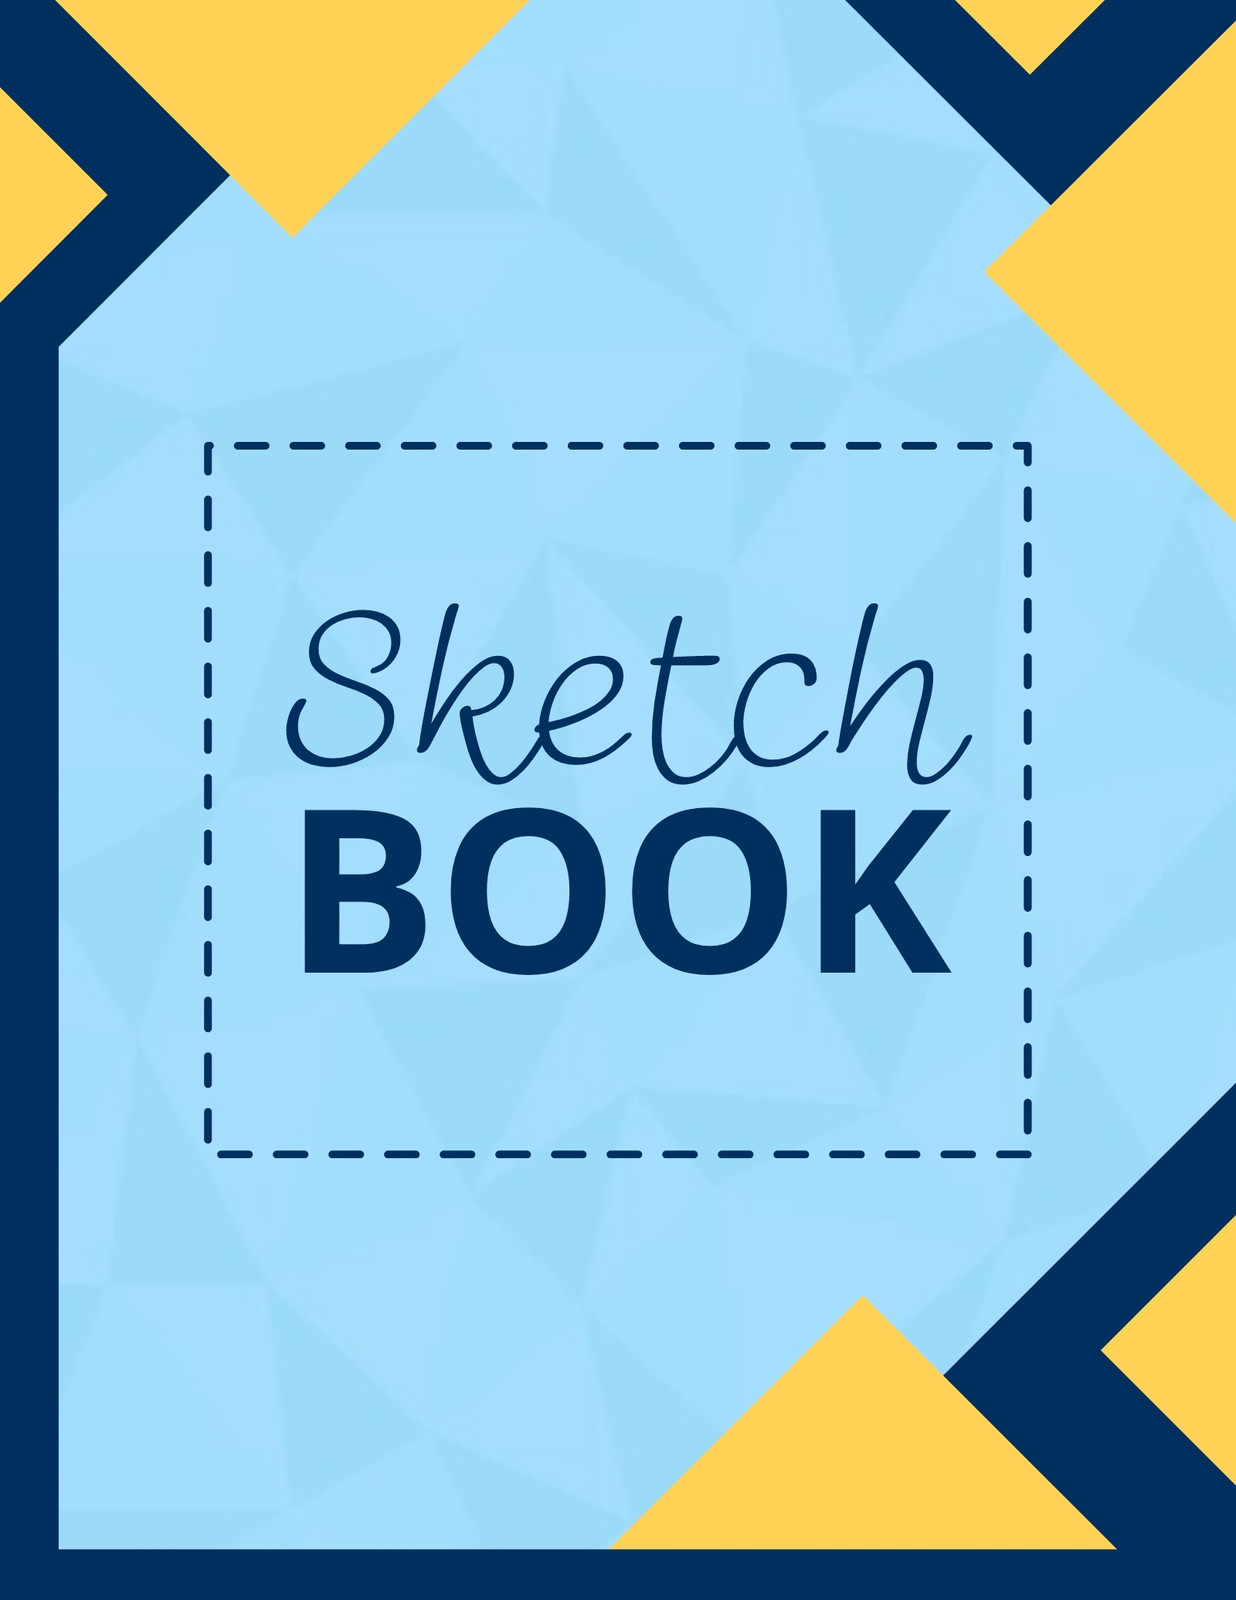 Free printable sketchbook templates you can customize